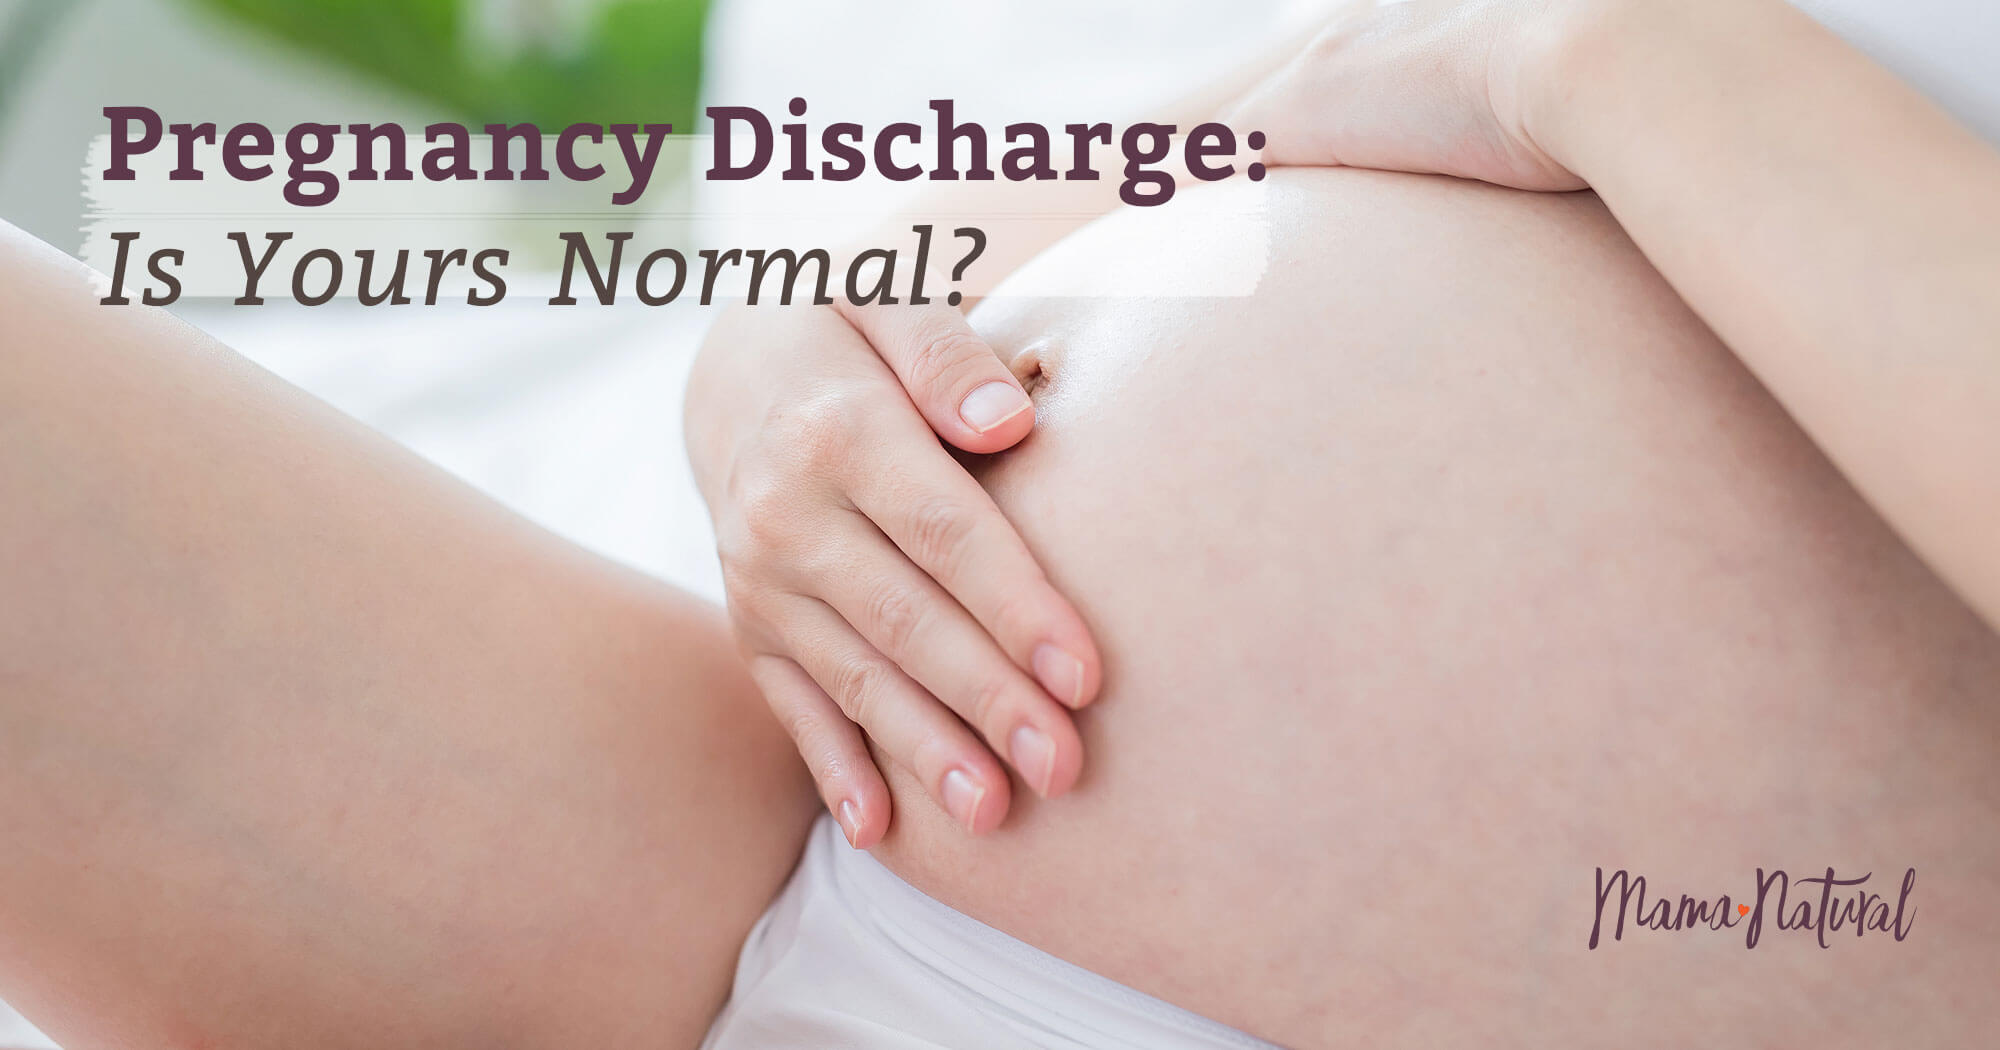 Brown Discharge During Pregnancy